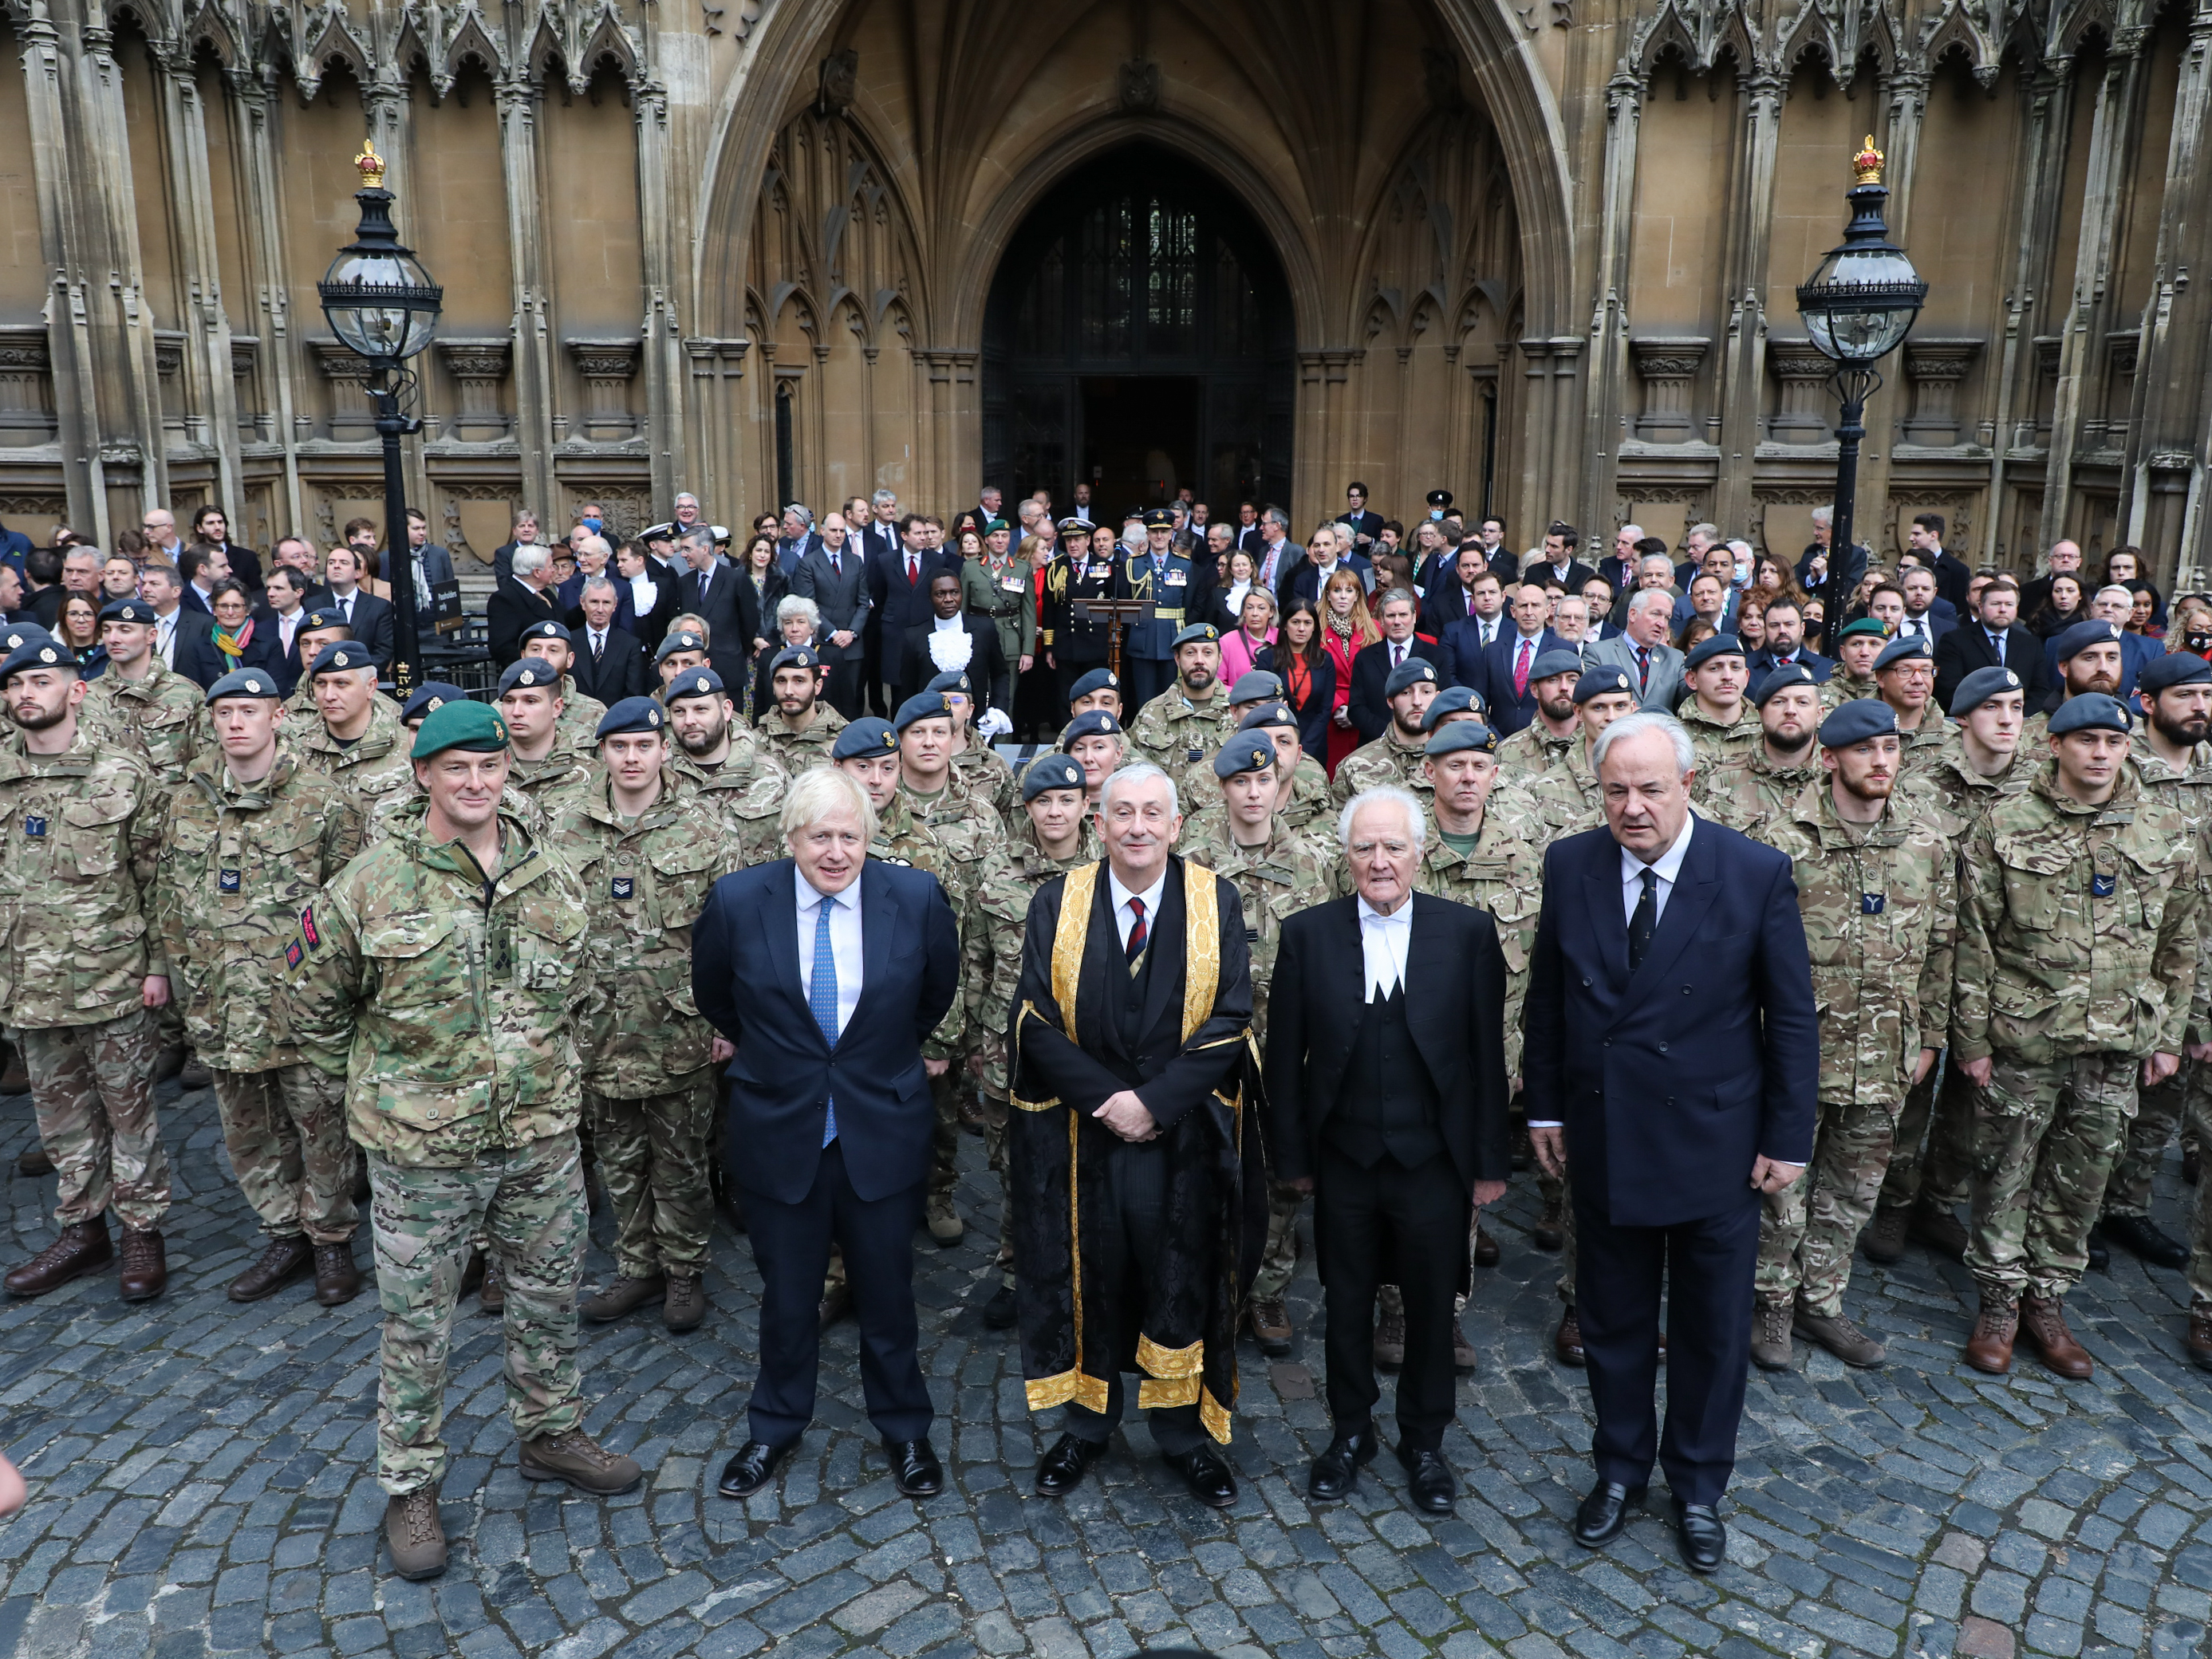 Armed Forces stand outside Parliament with Prime Minister and other notable figures.